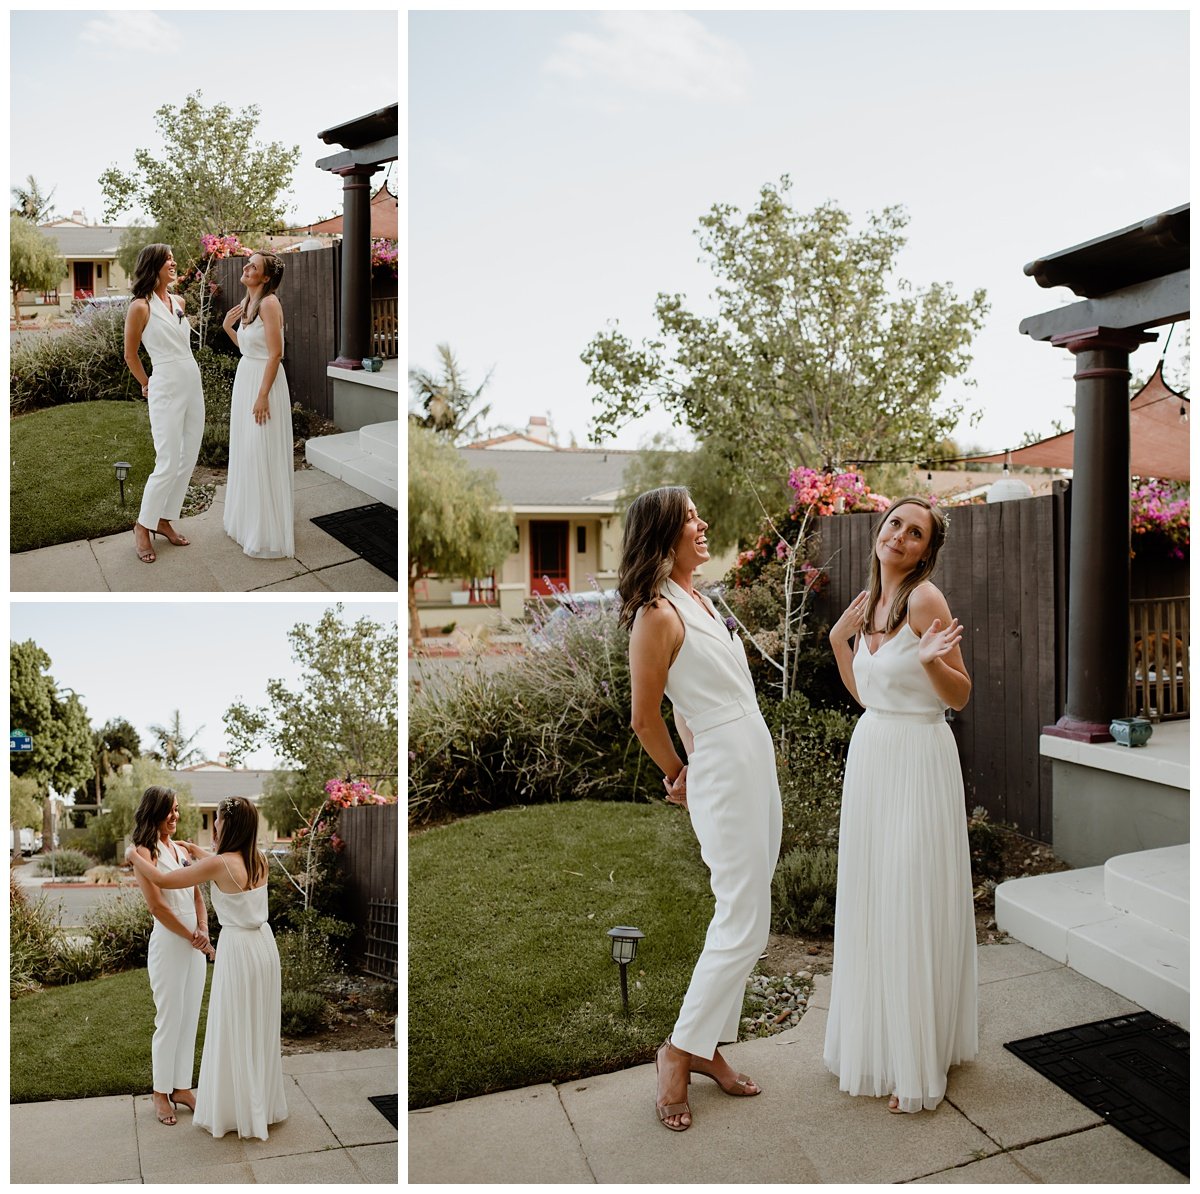 Michelle and Trish Intimate Wedding in Long Beach, CA - Eve Rox Photography-56_WEB.jpg